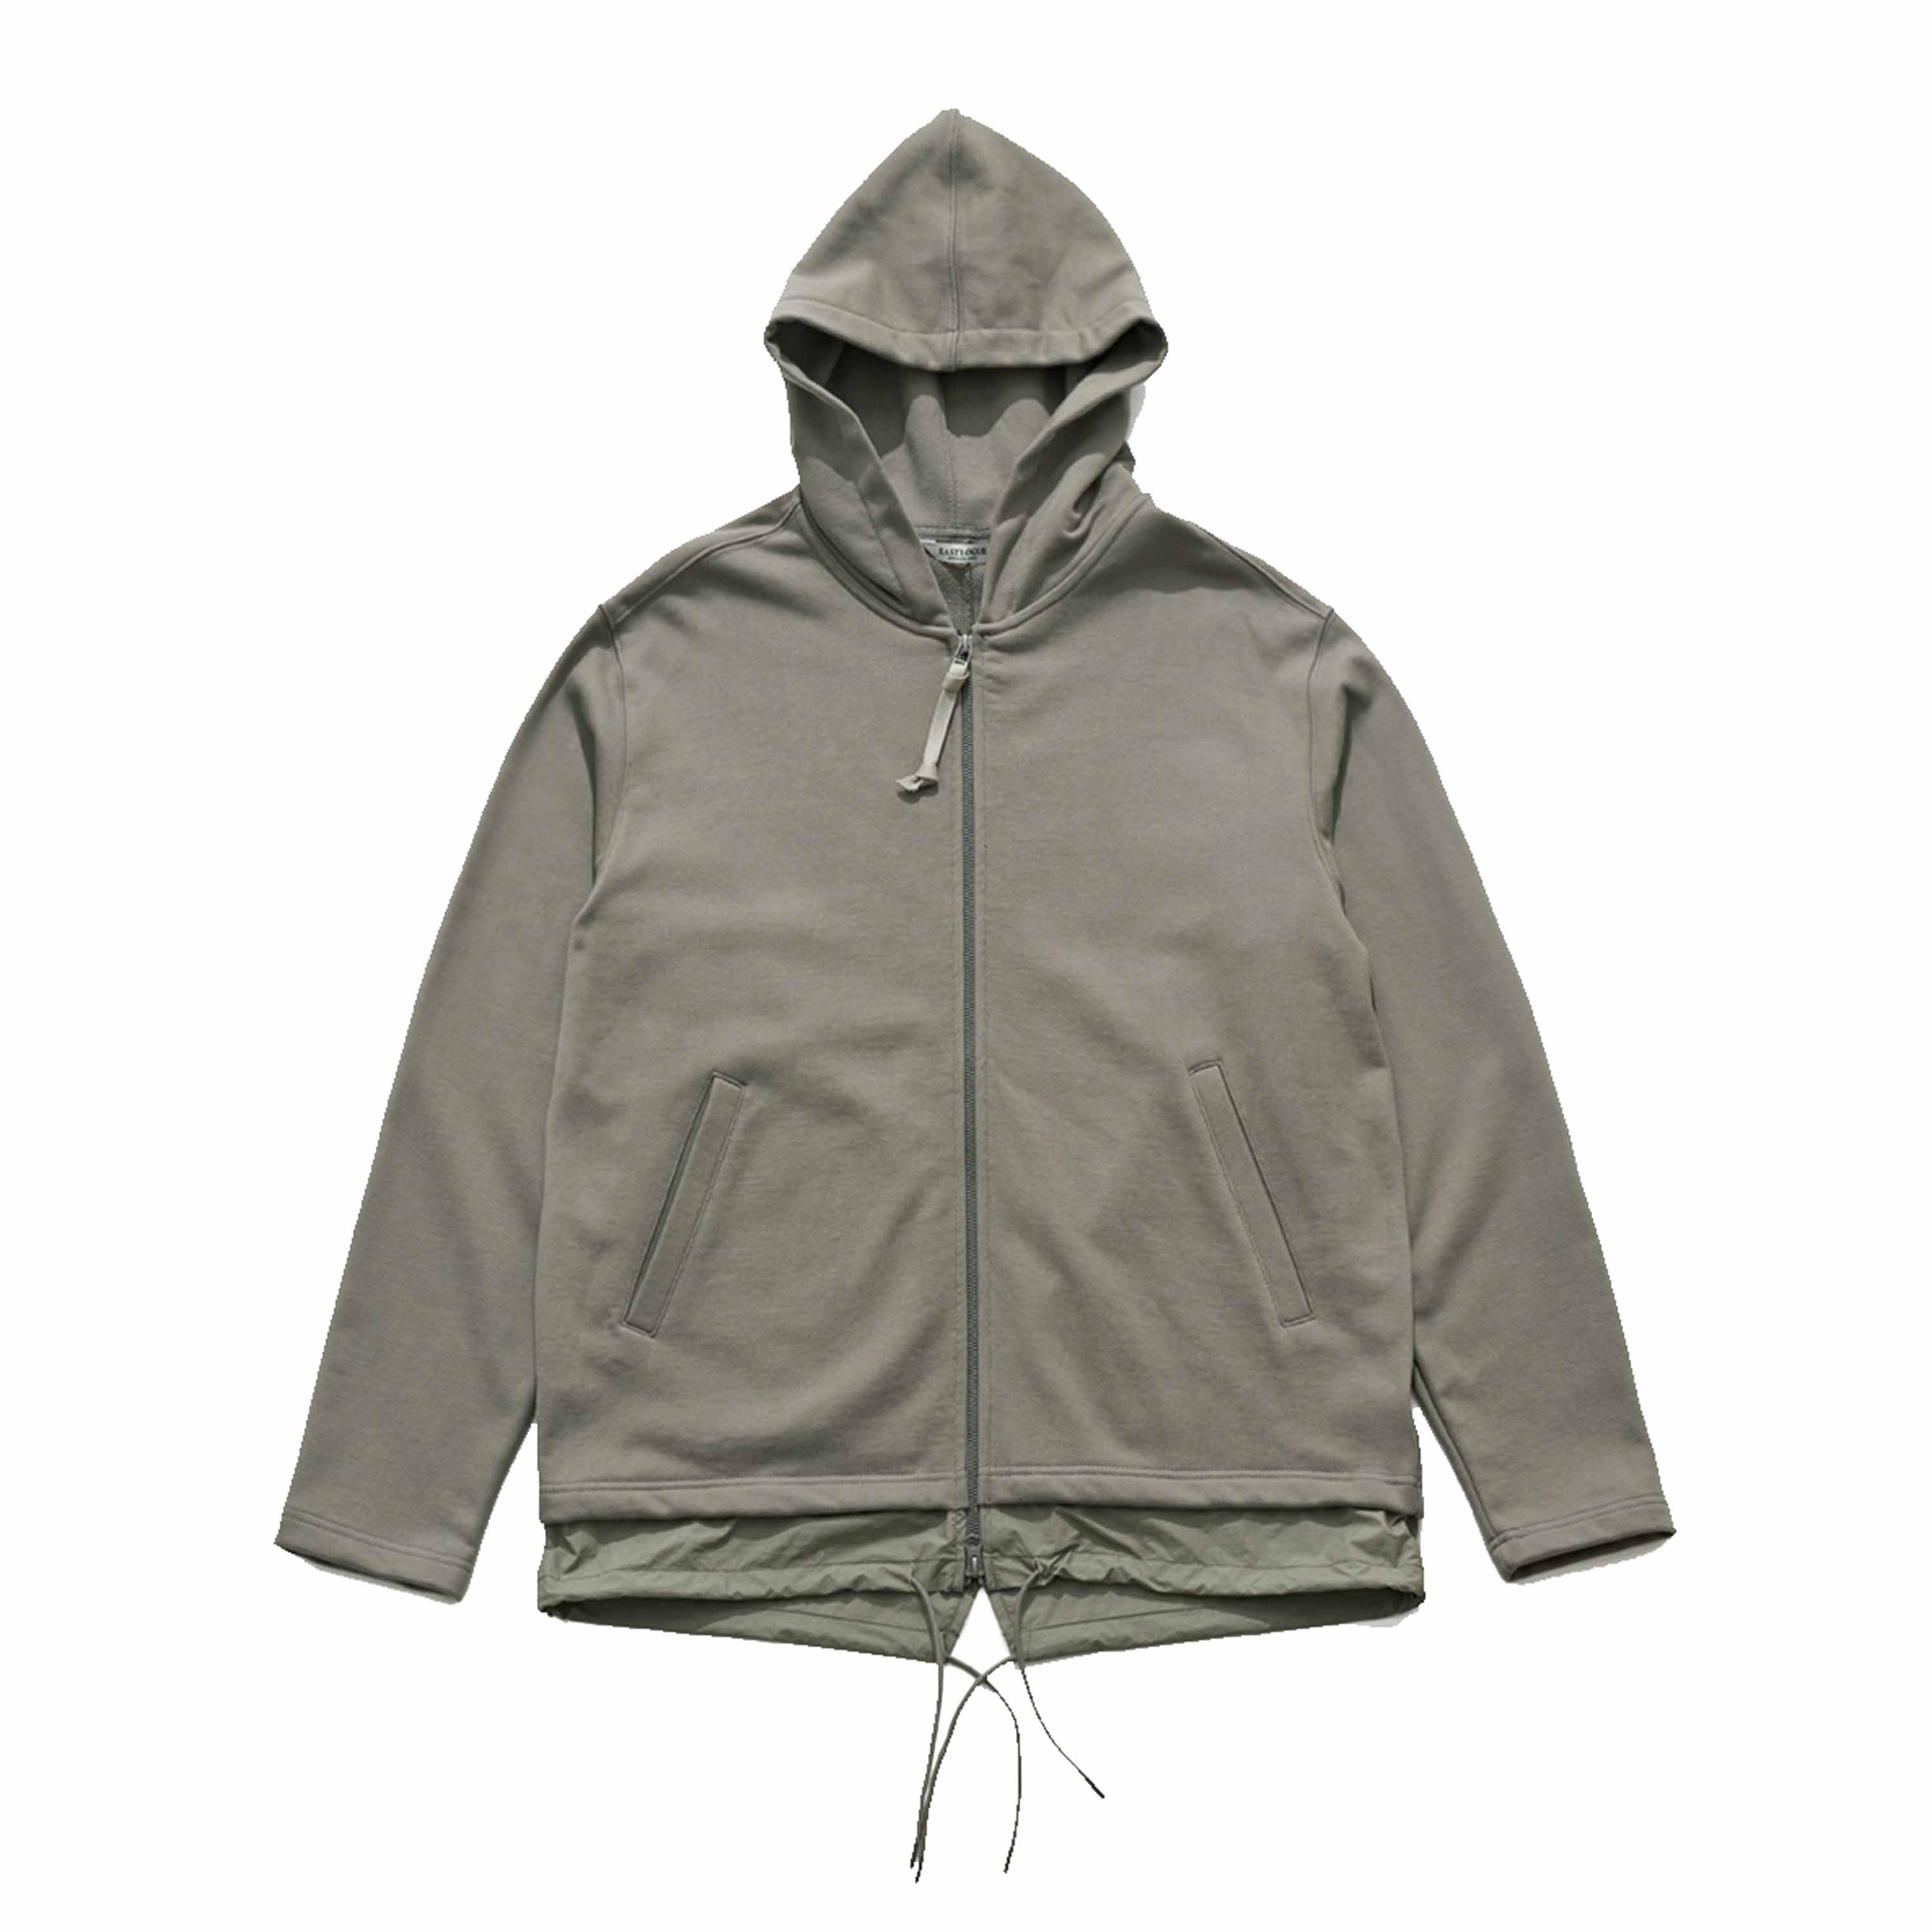 FISHTAIL HOODED ZIP UP - TAN